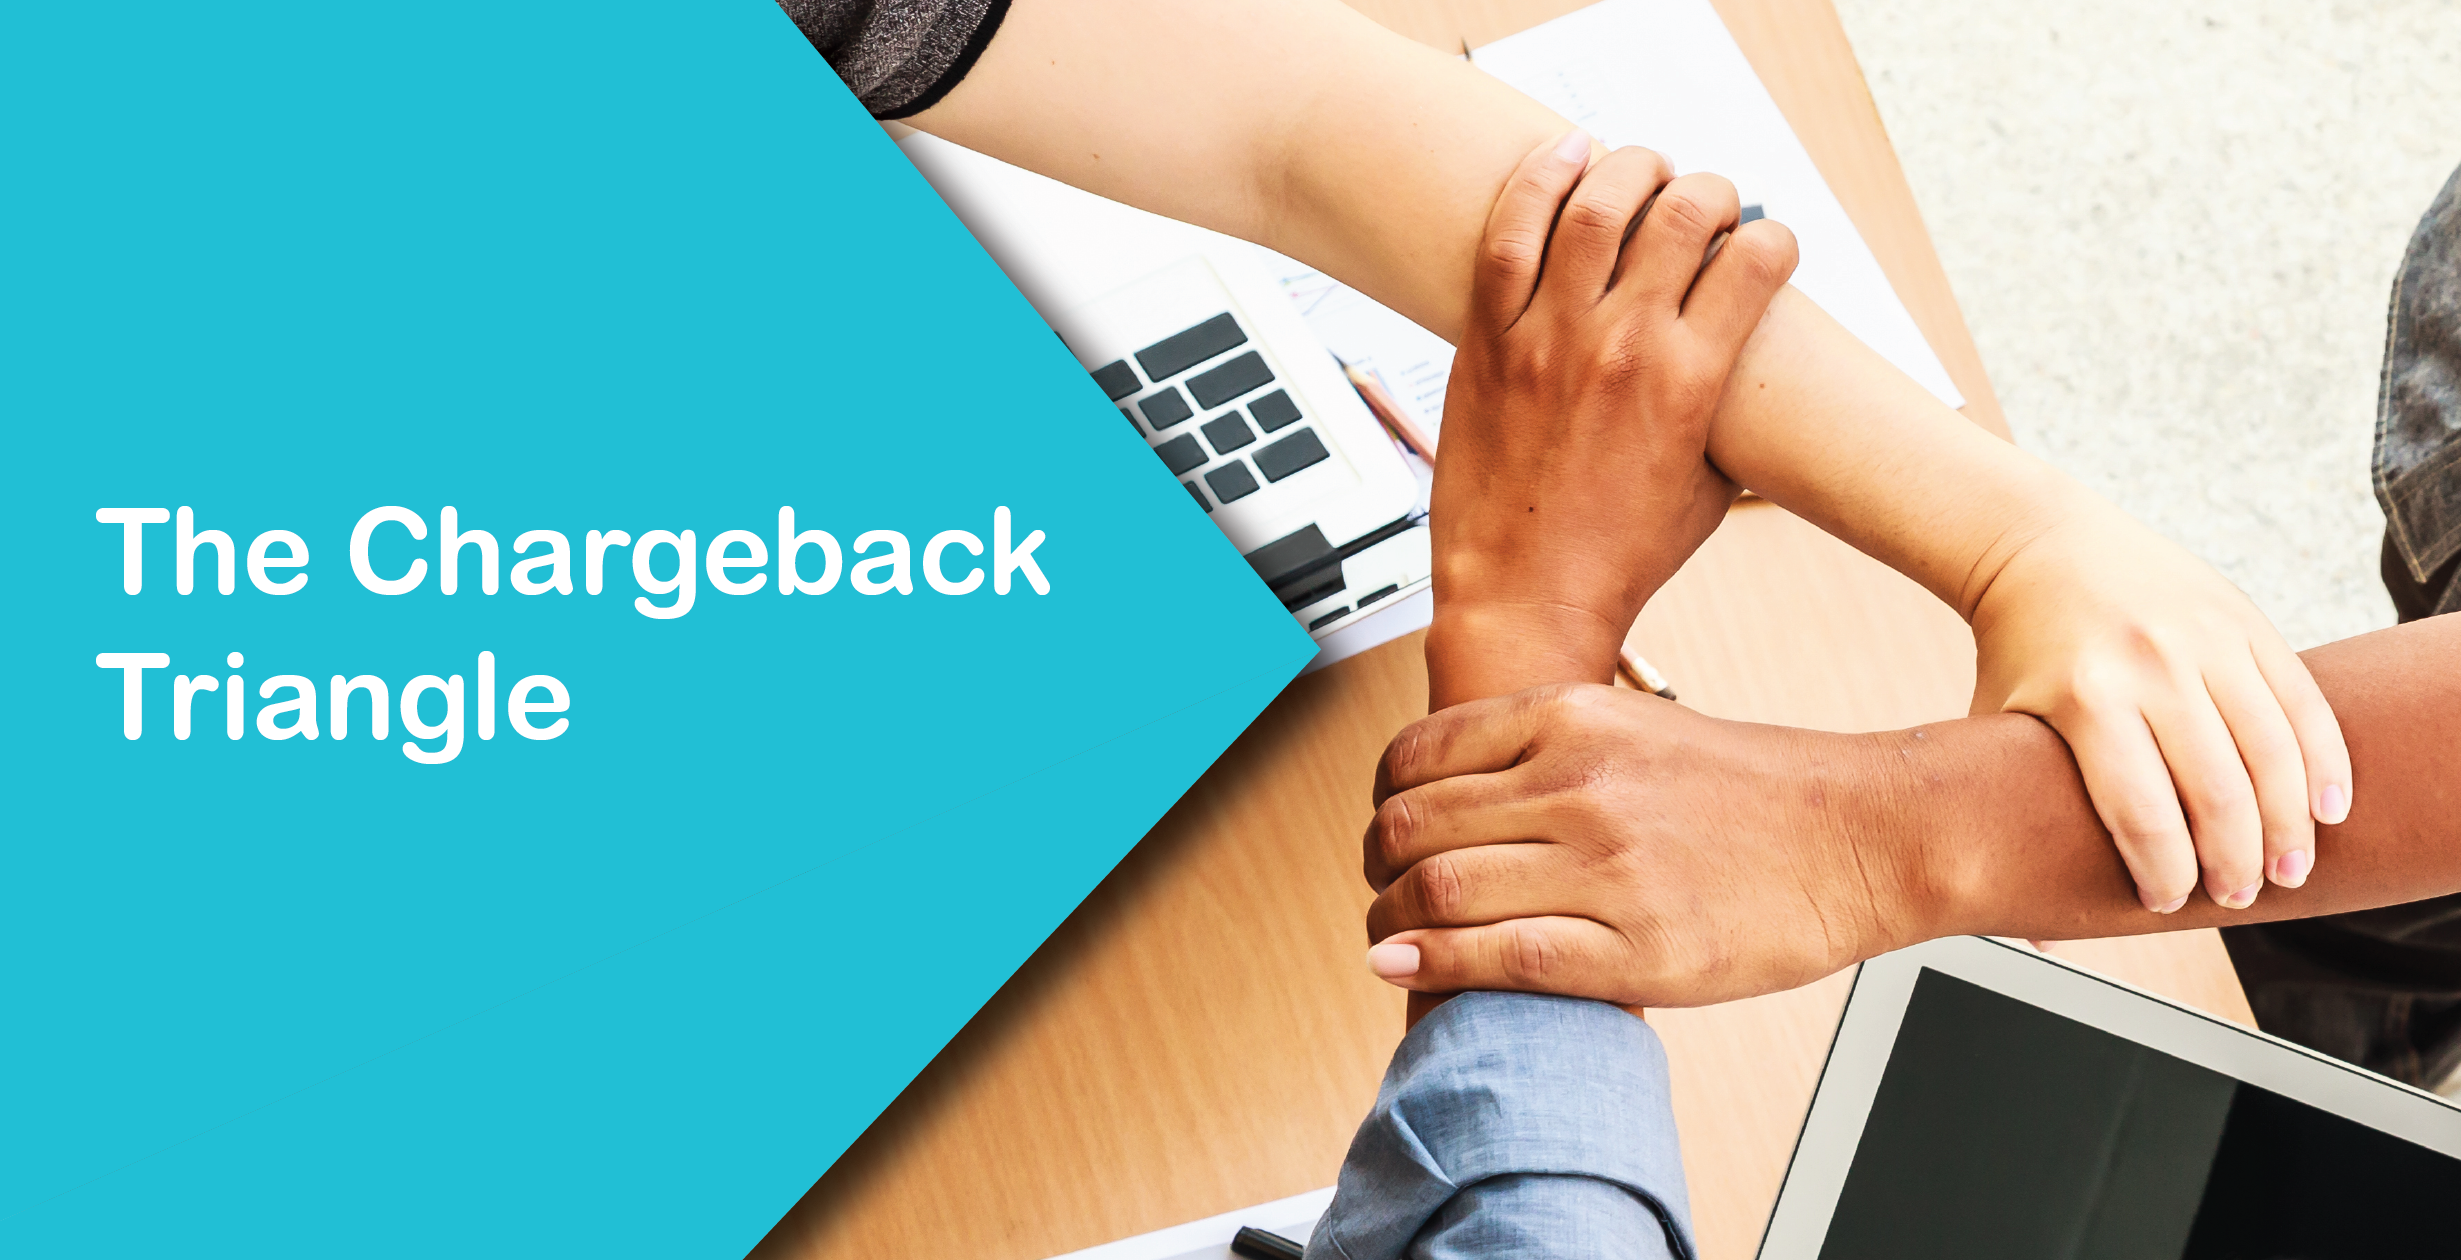 The Chargeback Triangle